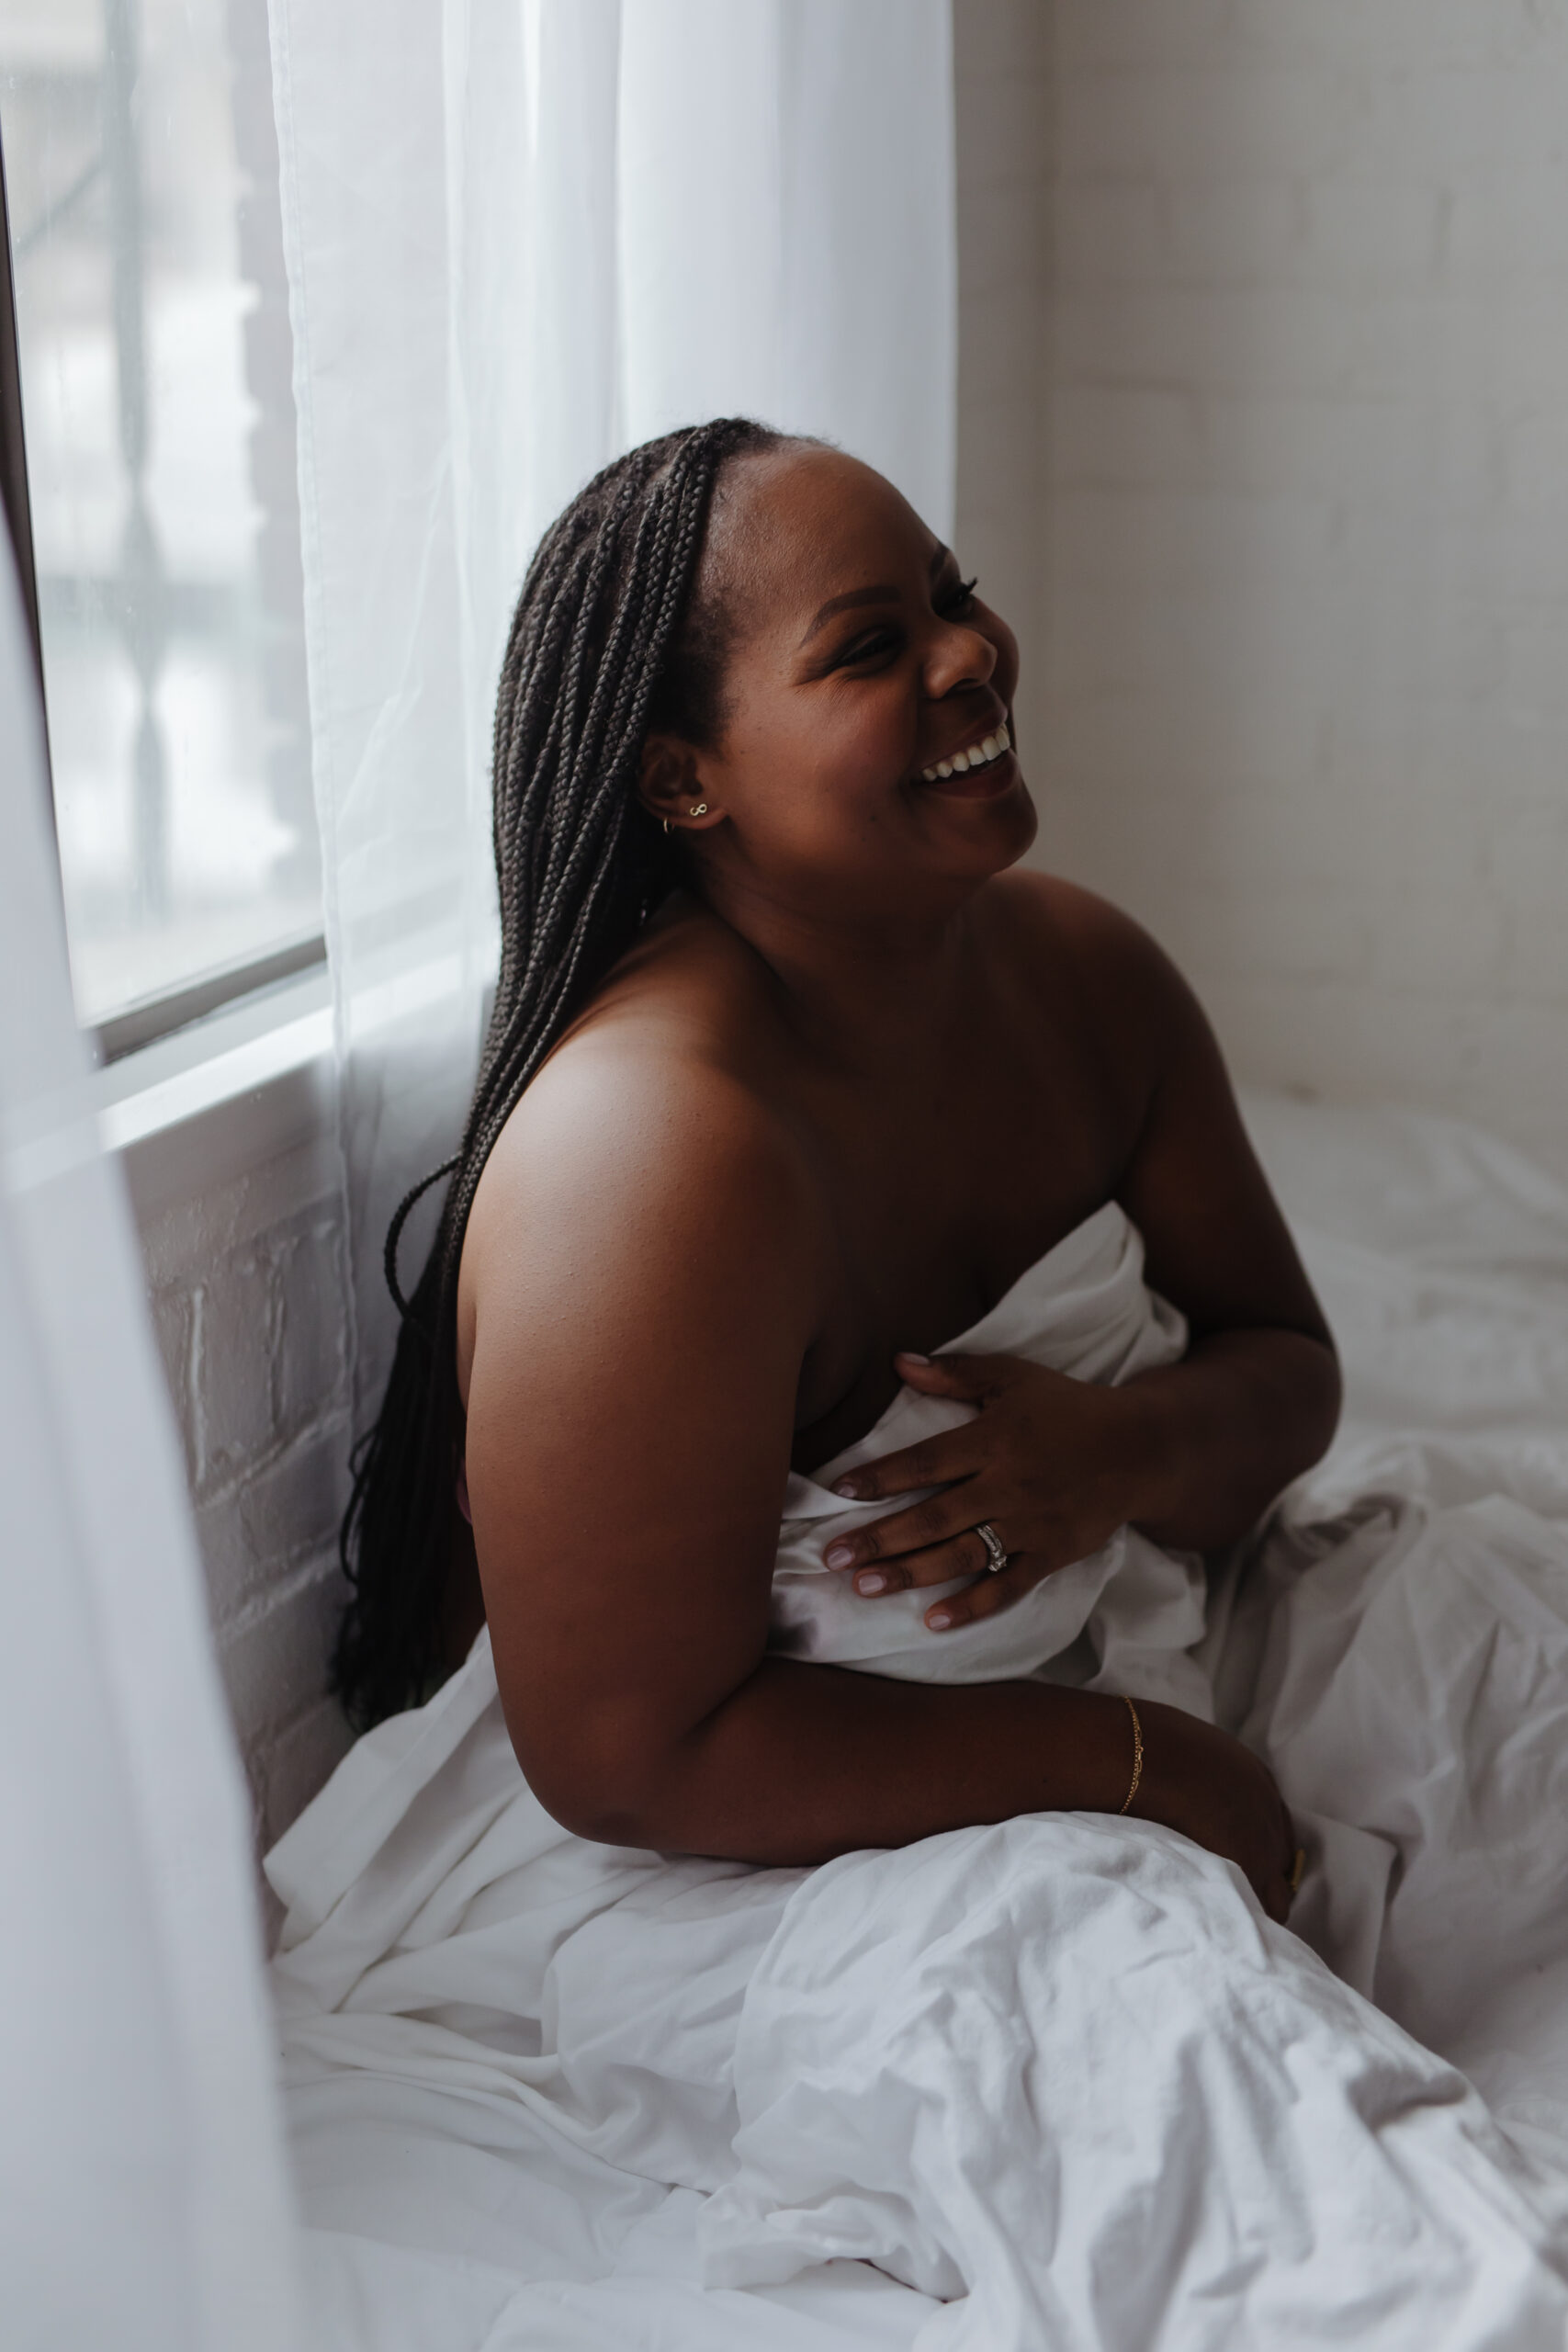 a black woman with braids laughs while wrapped in a white sheet for a boudoir photography session